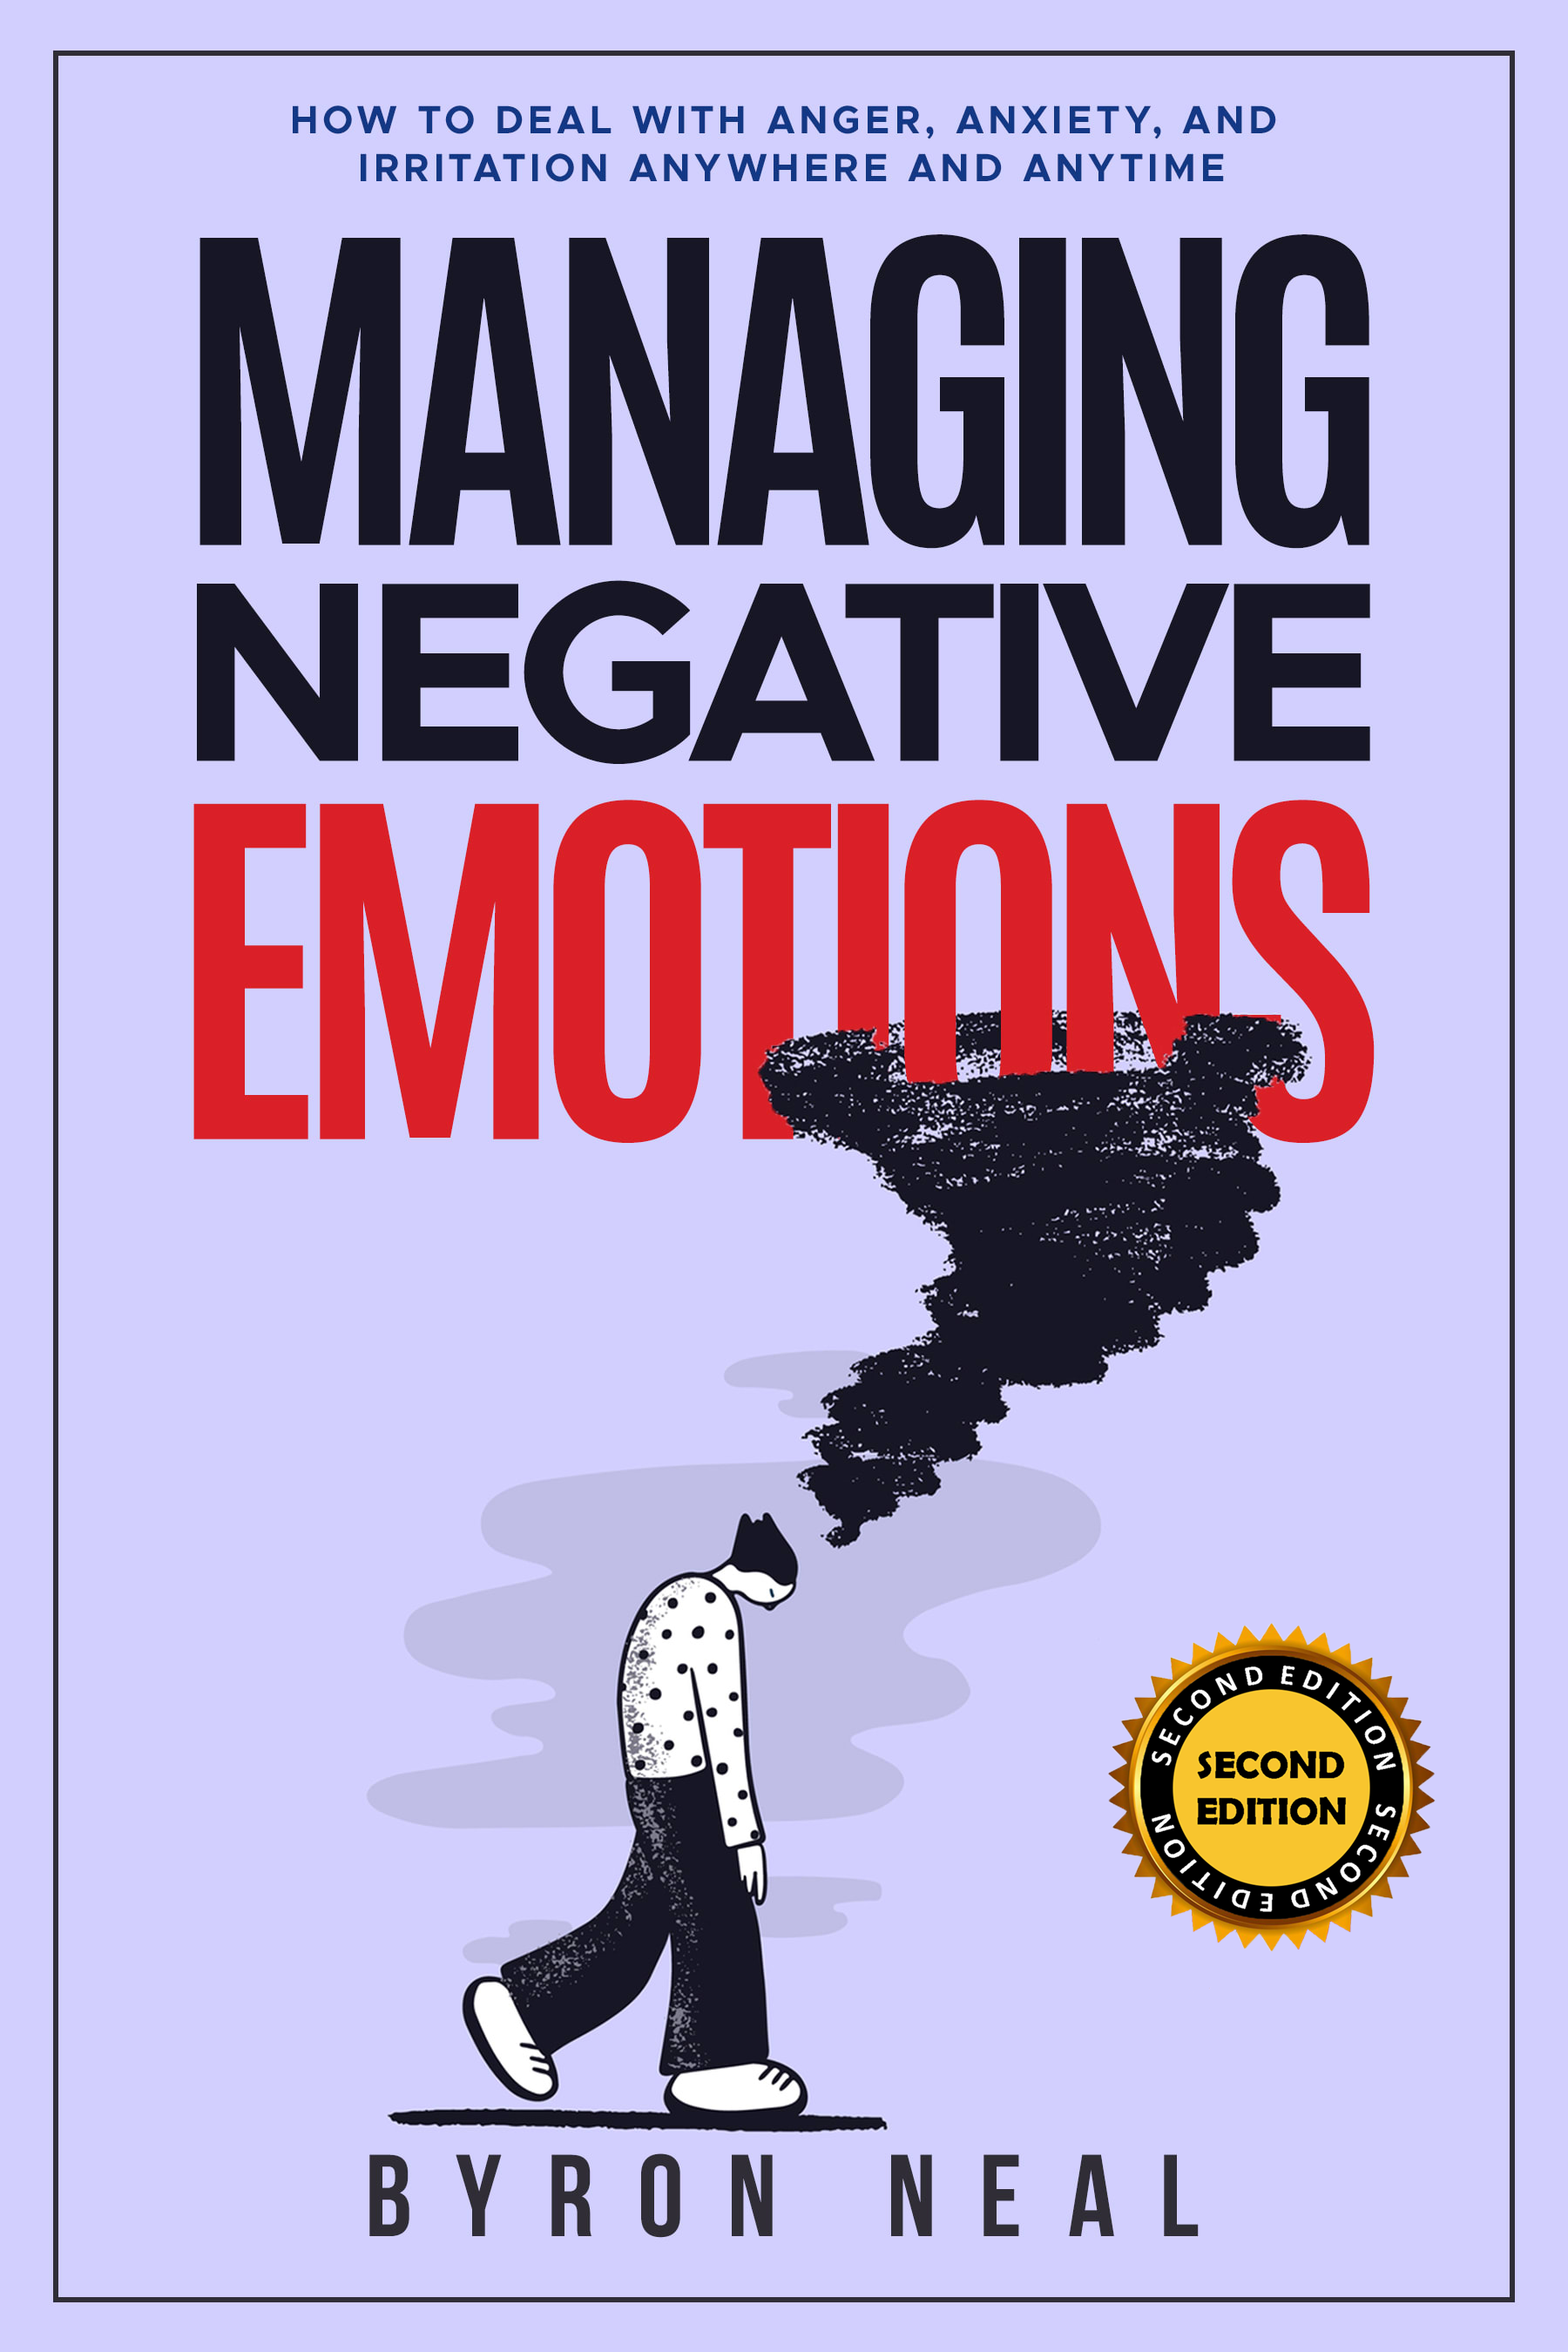 FREE: Managing Negative Emotions by Byron Neal